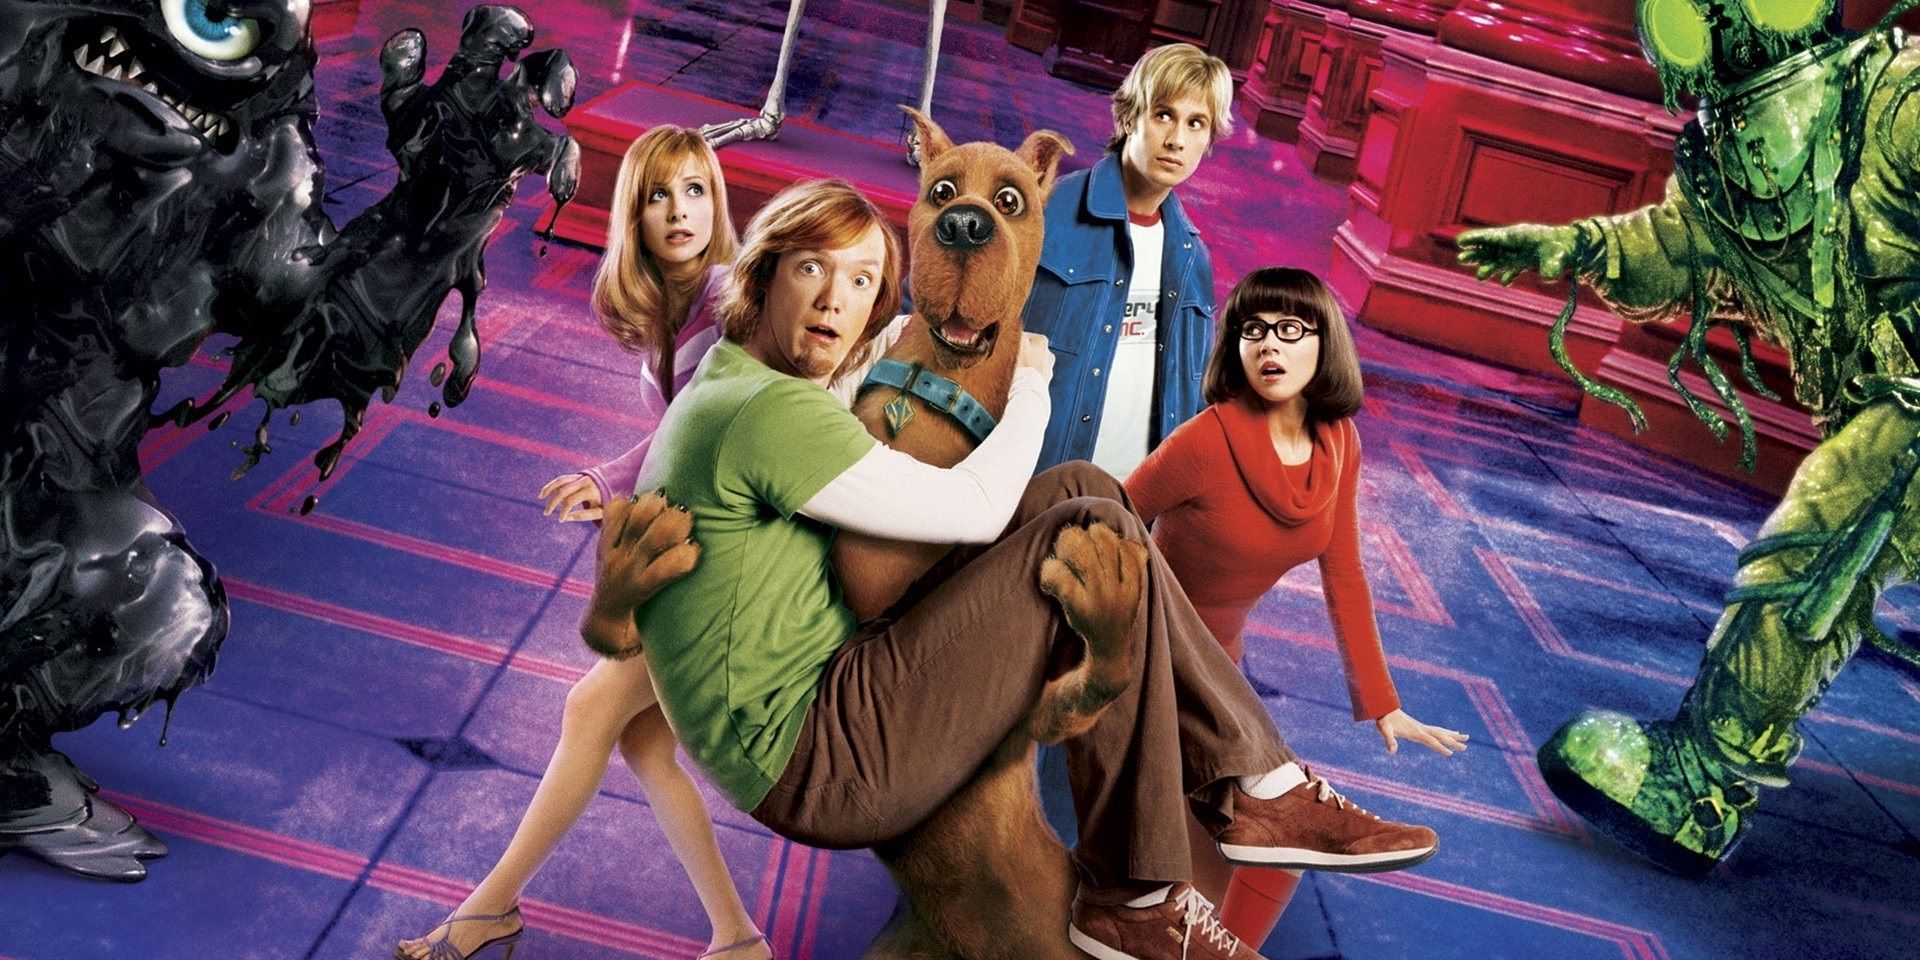 The live action Scooby Doo movie characters and monsters in a cropped poster image